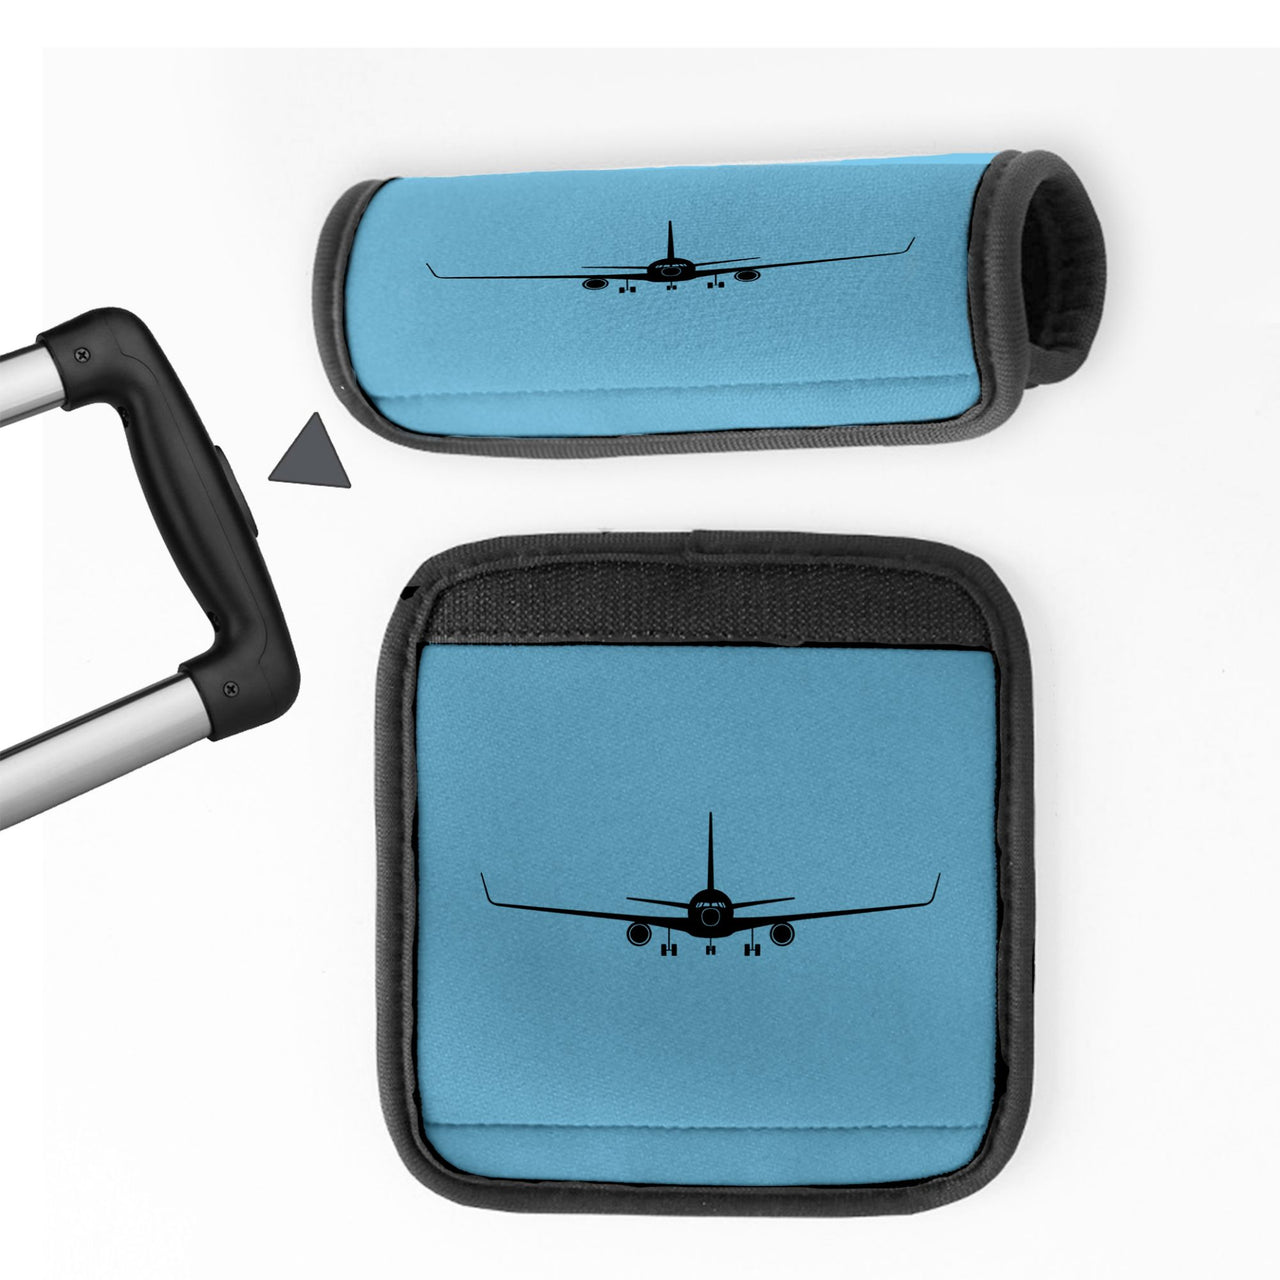 Boeing 767 Silhouette Designed Neoprene Luggage Handle Covers